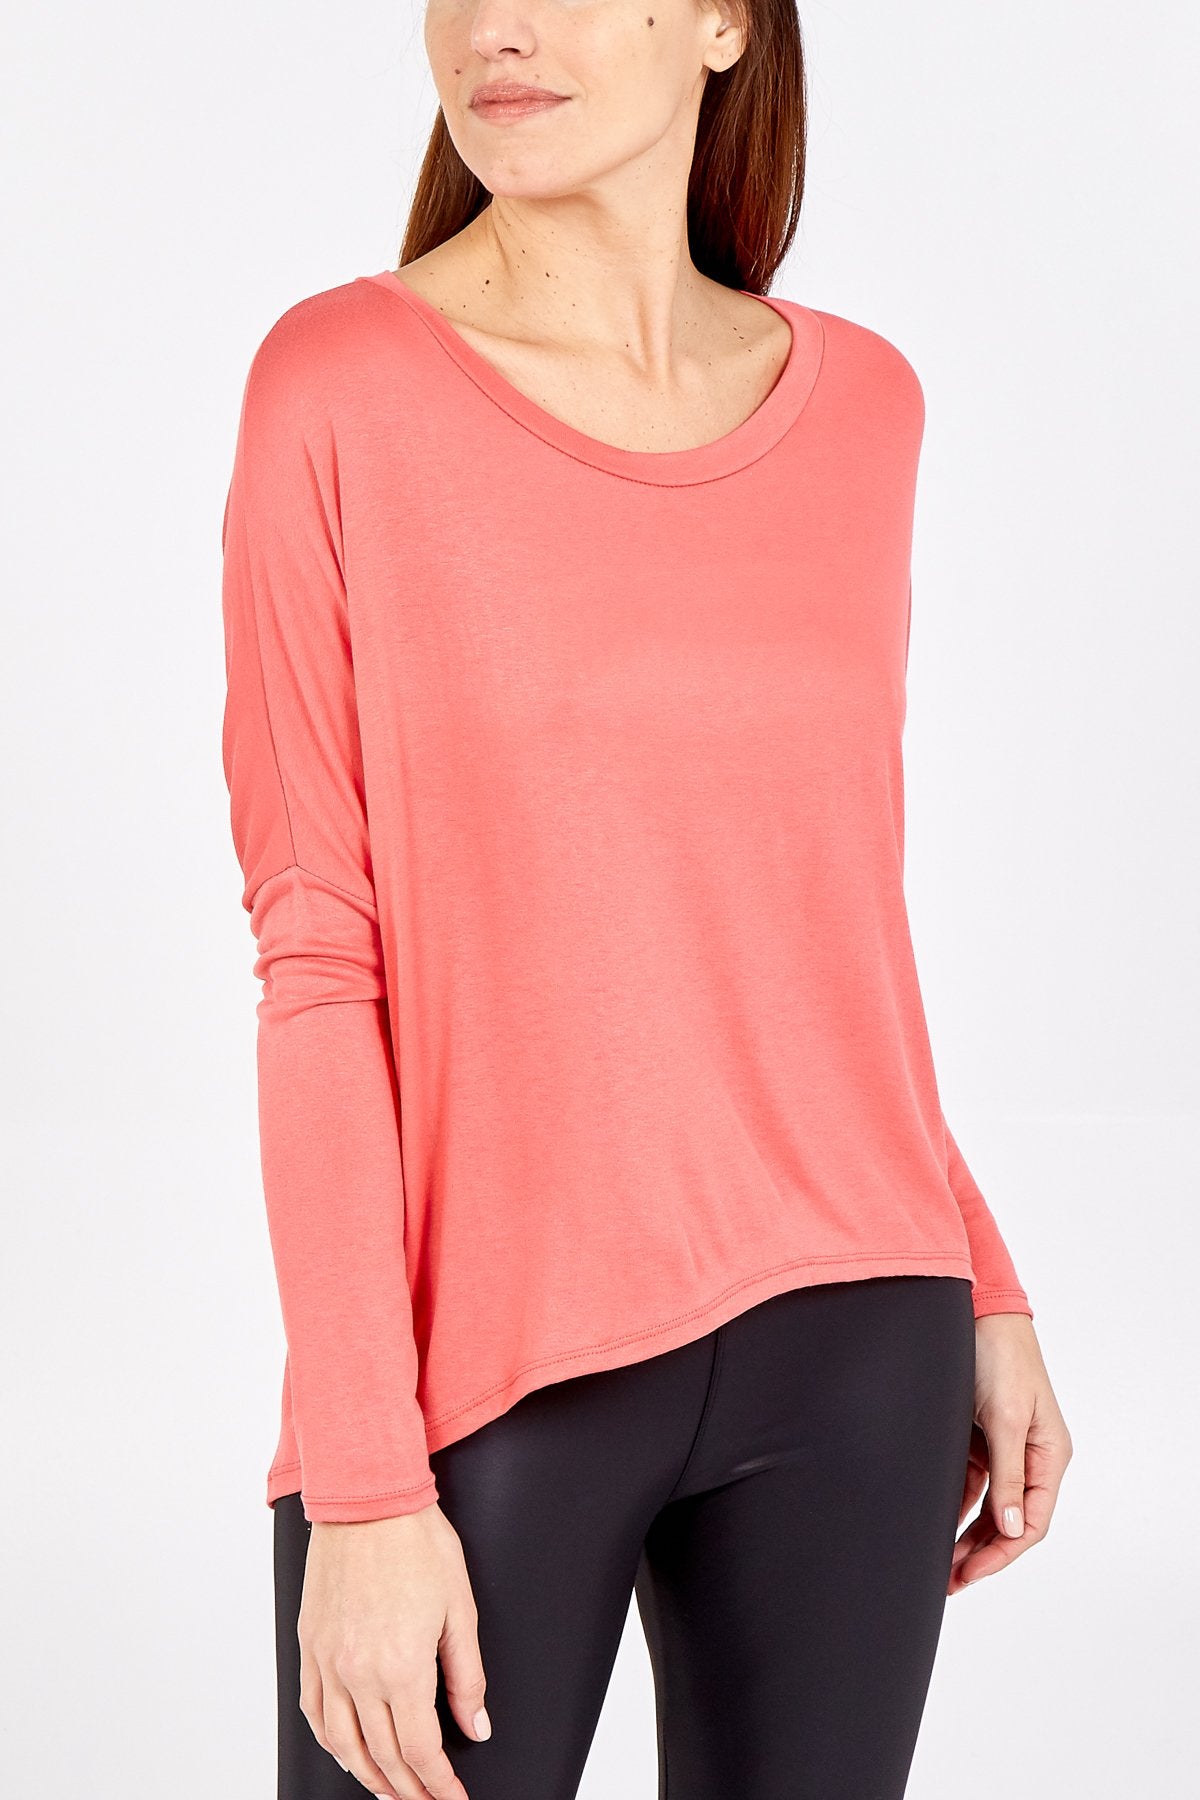 Long Sleeve HiLo Tee - Coral - Liven Boutique